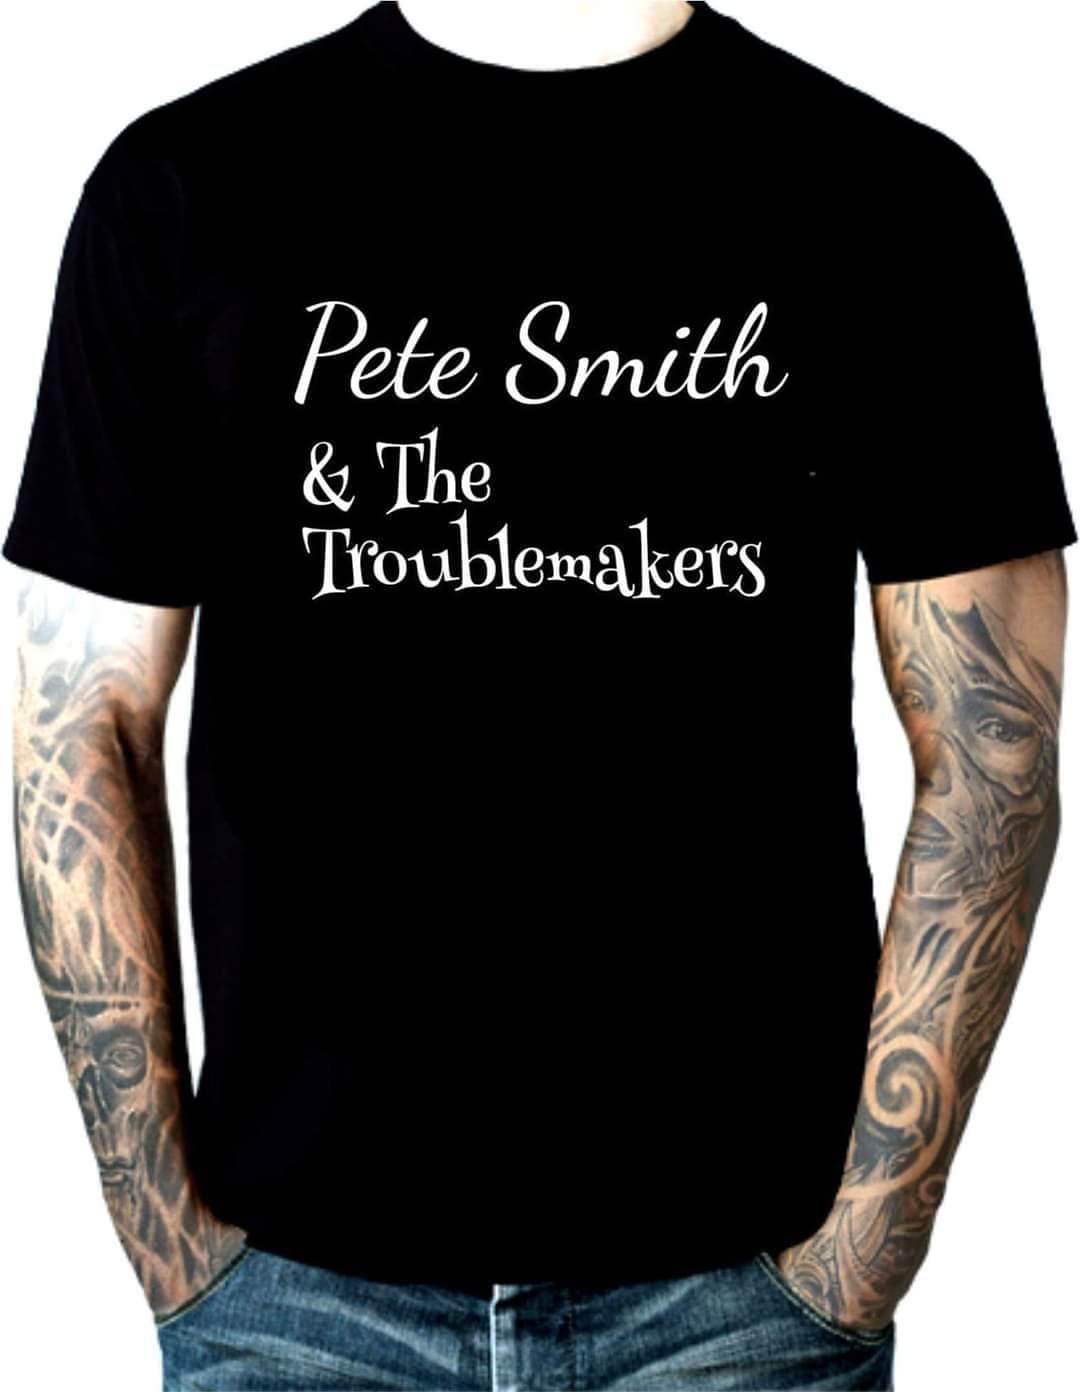 Image of Pete Smith & The Troublemakers t-shirt